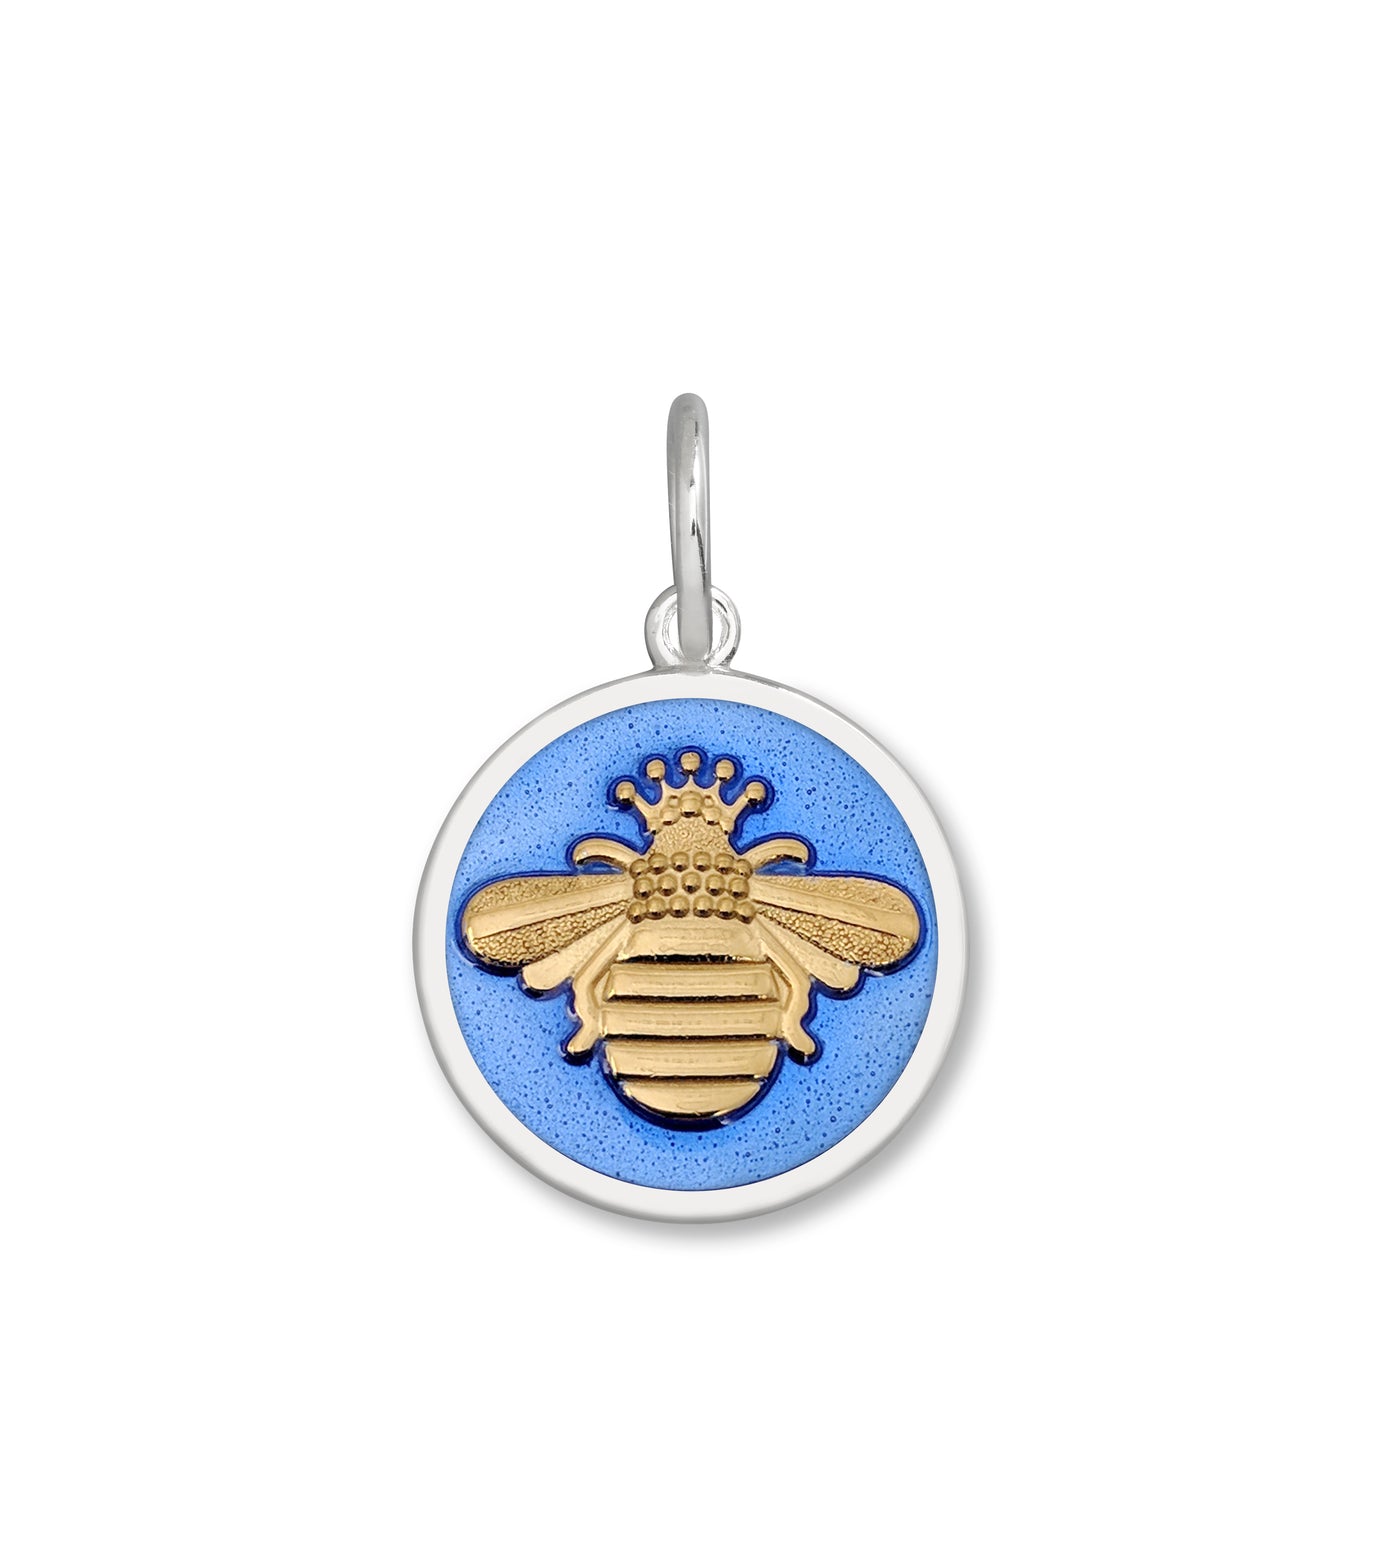 Lola & Company Jewelry Queen Bee Pendant Gold in Periwinkle